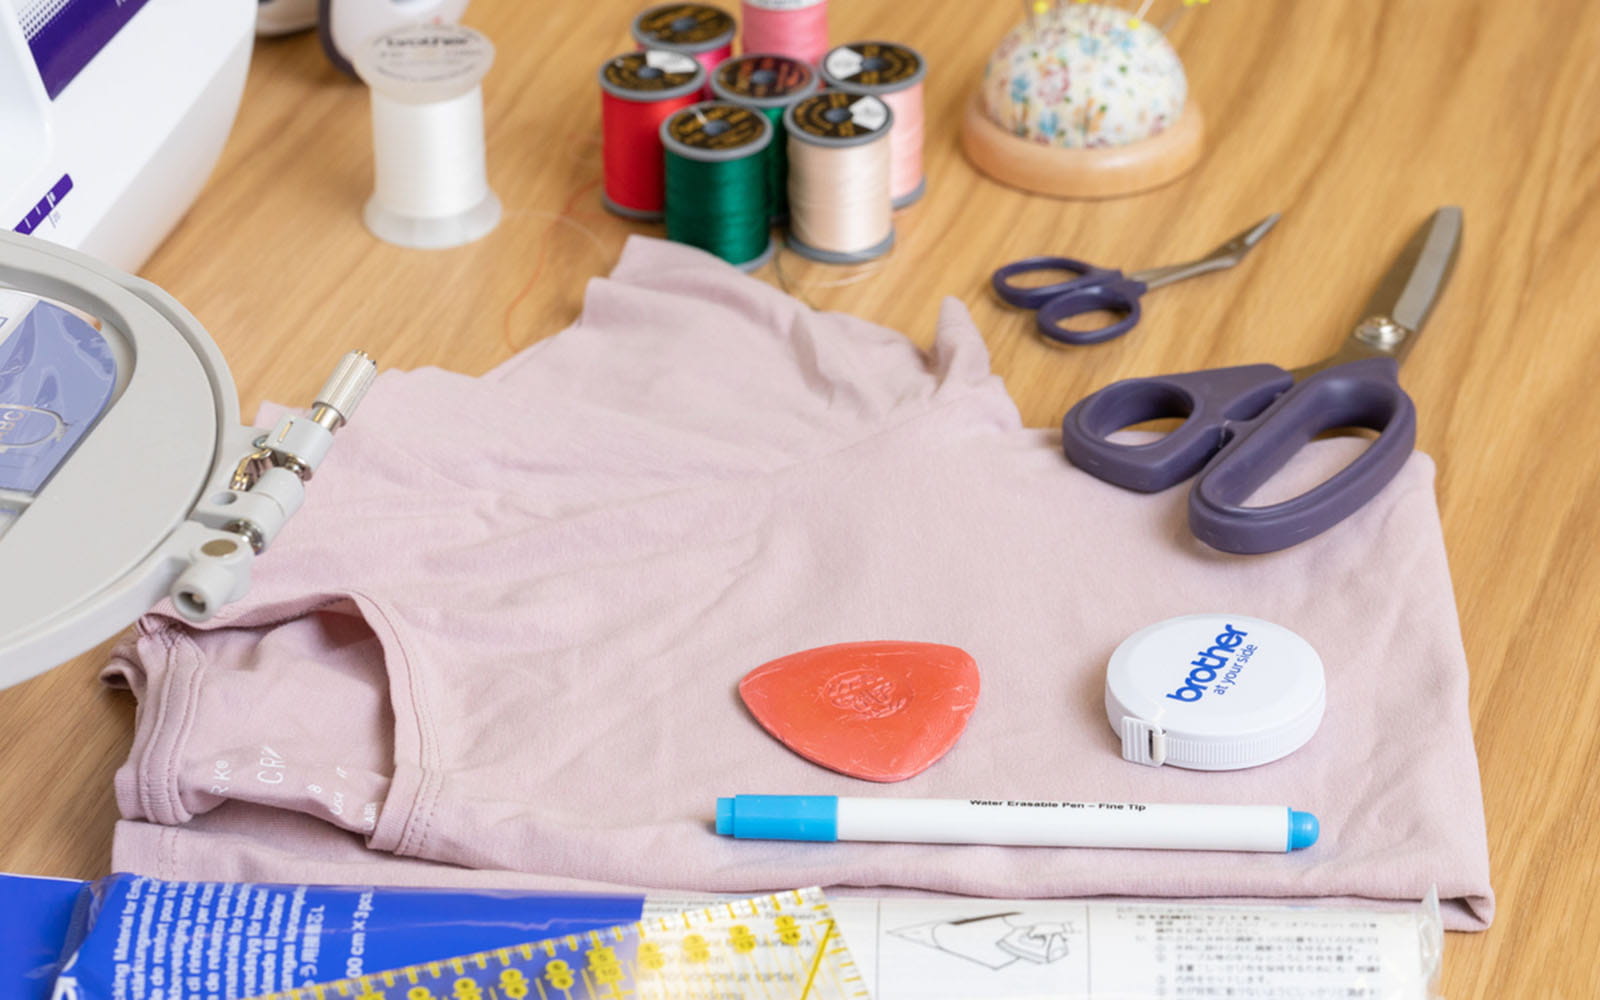 Sewing materials laid on table